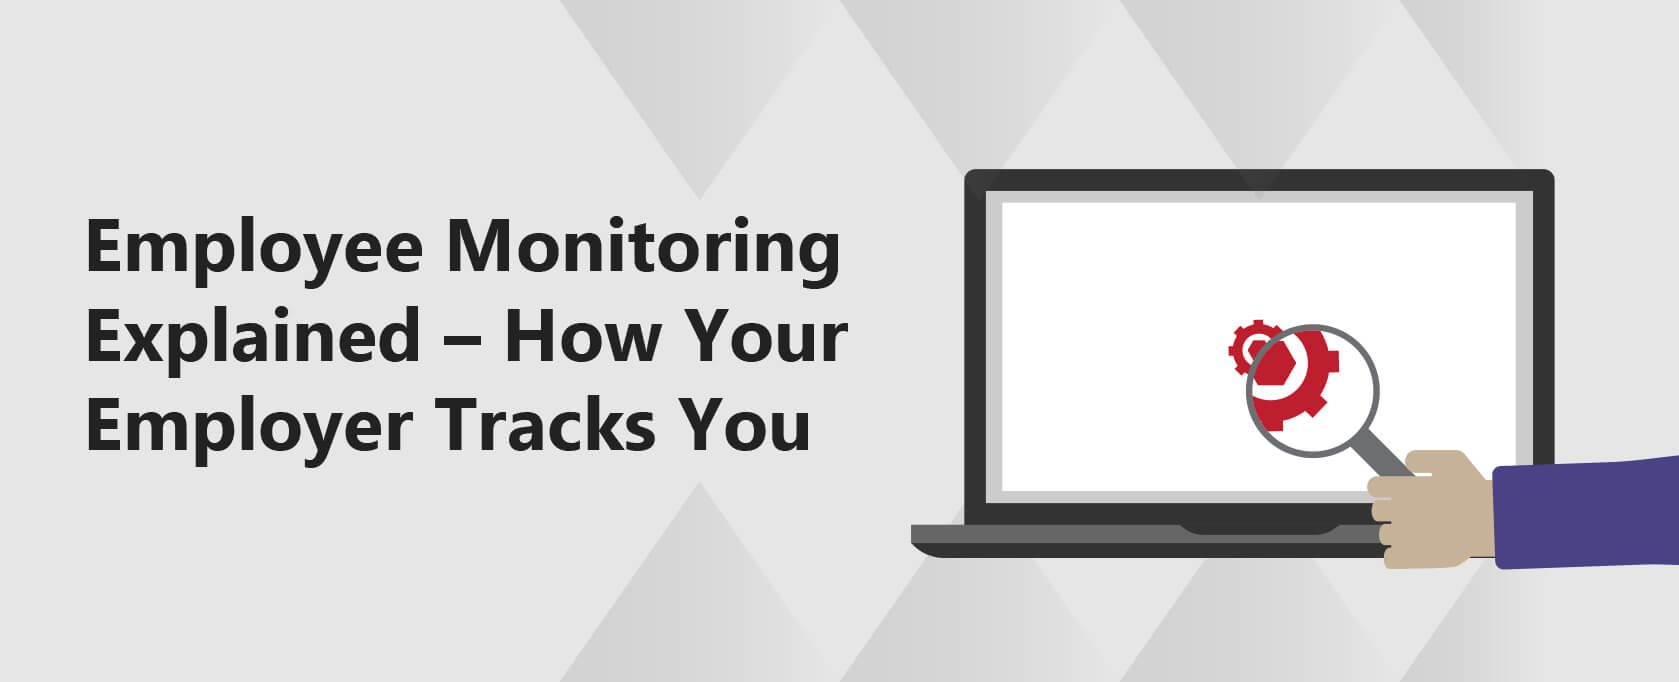 Employee Monitoring Explained – How Your Employer Tracks You